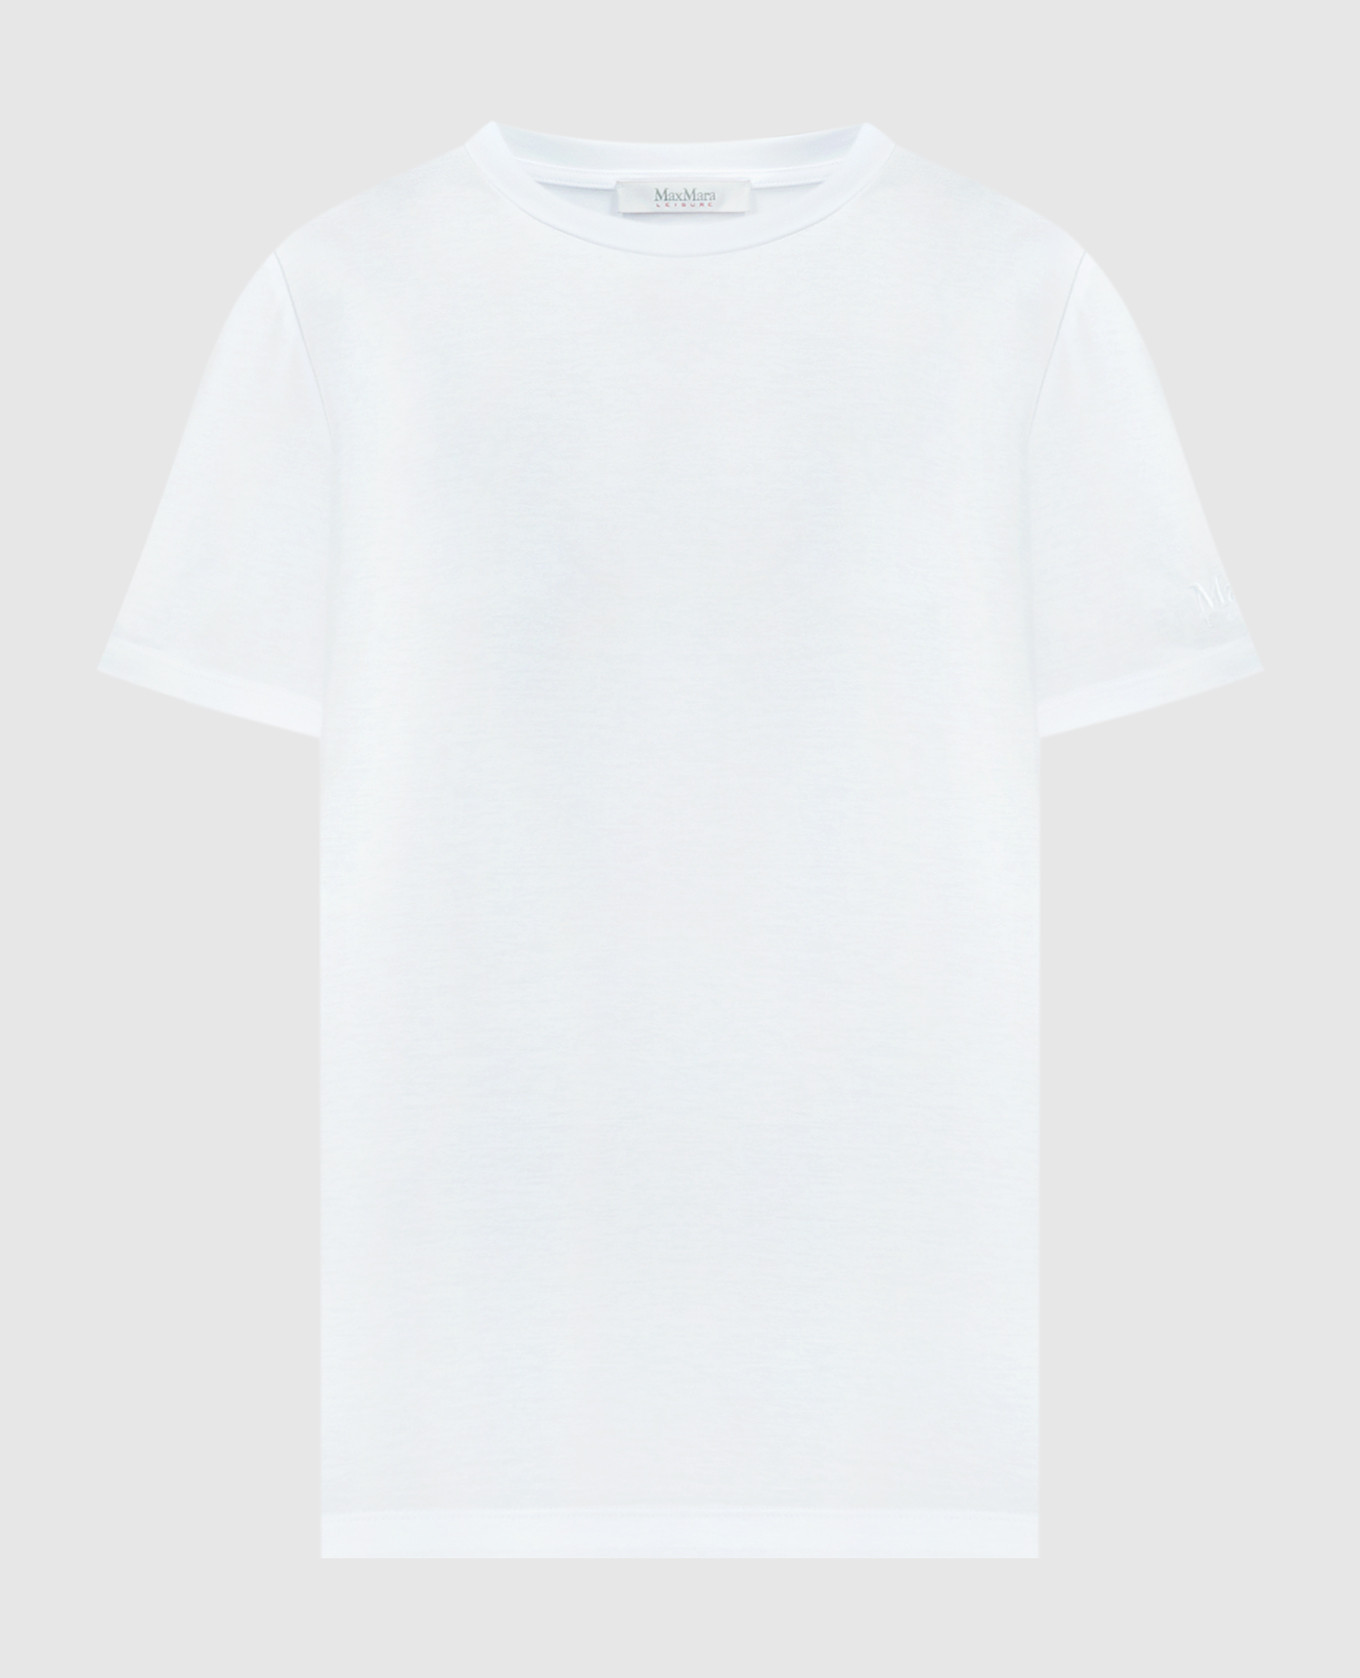 COSMO white t-shirt with logo embroidery